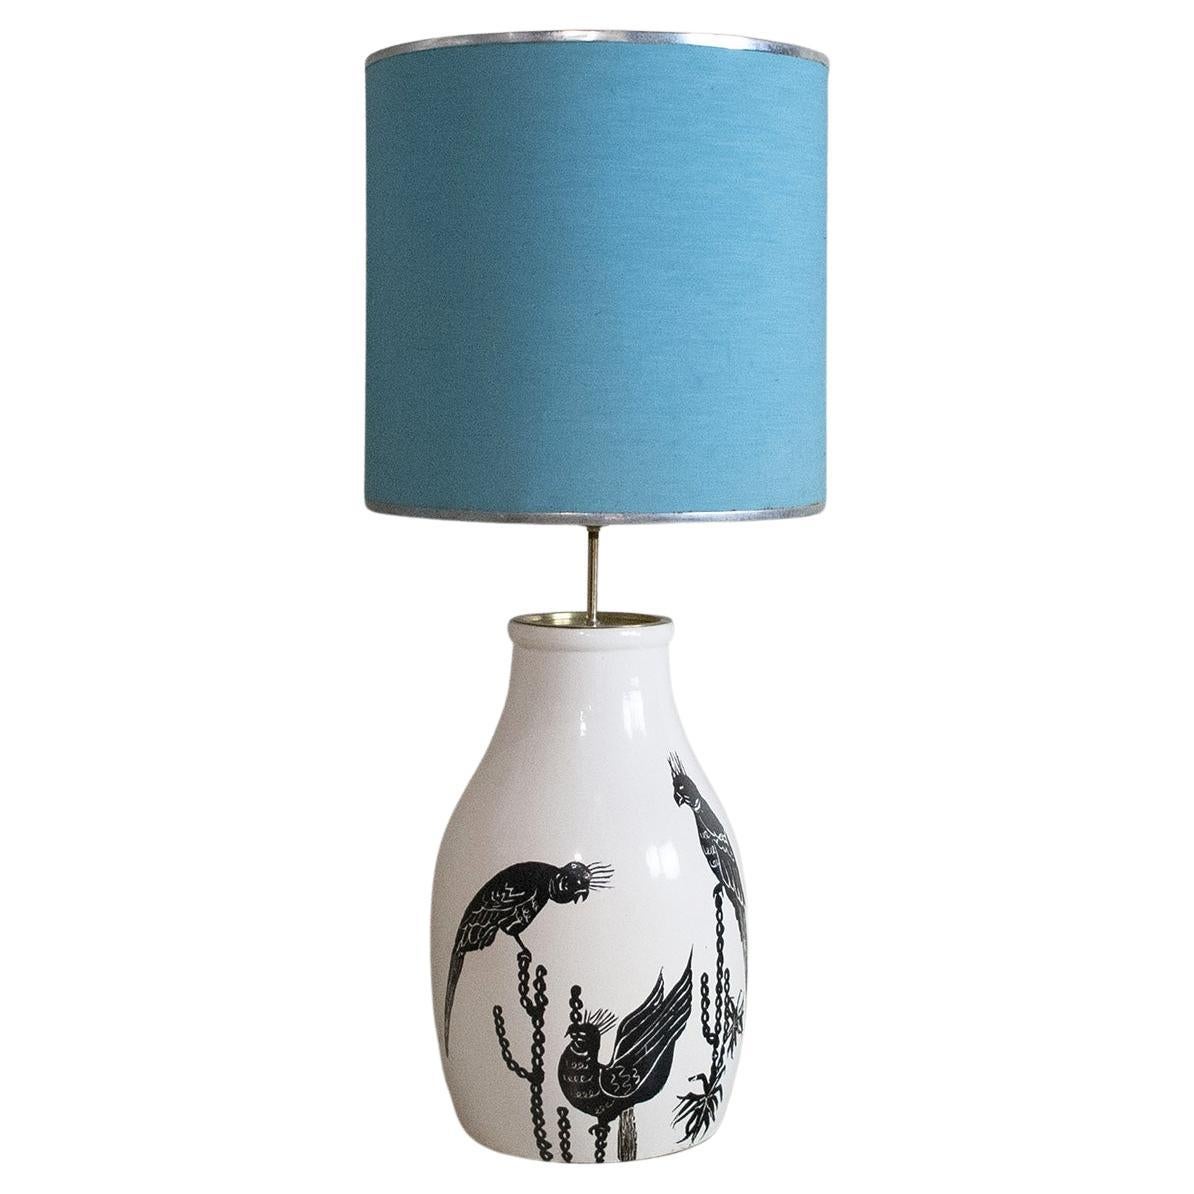 Italian Midcentury Ceramic Table Lamp with Parrots Painting from the Sixties For Sale